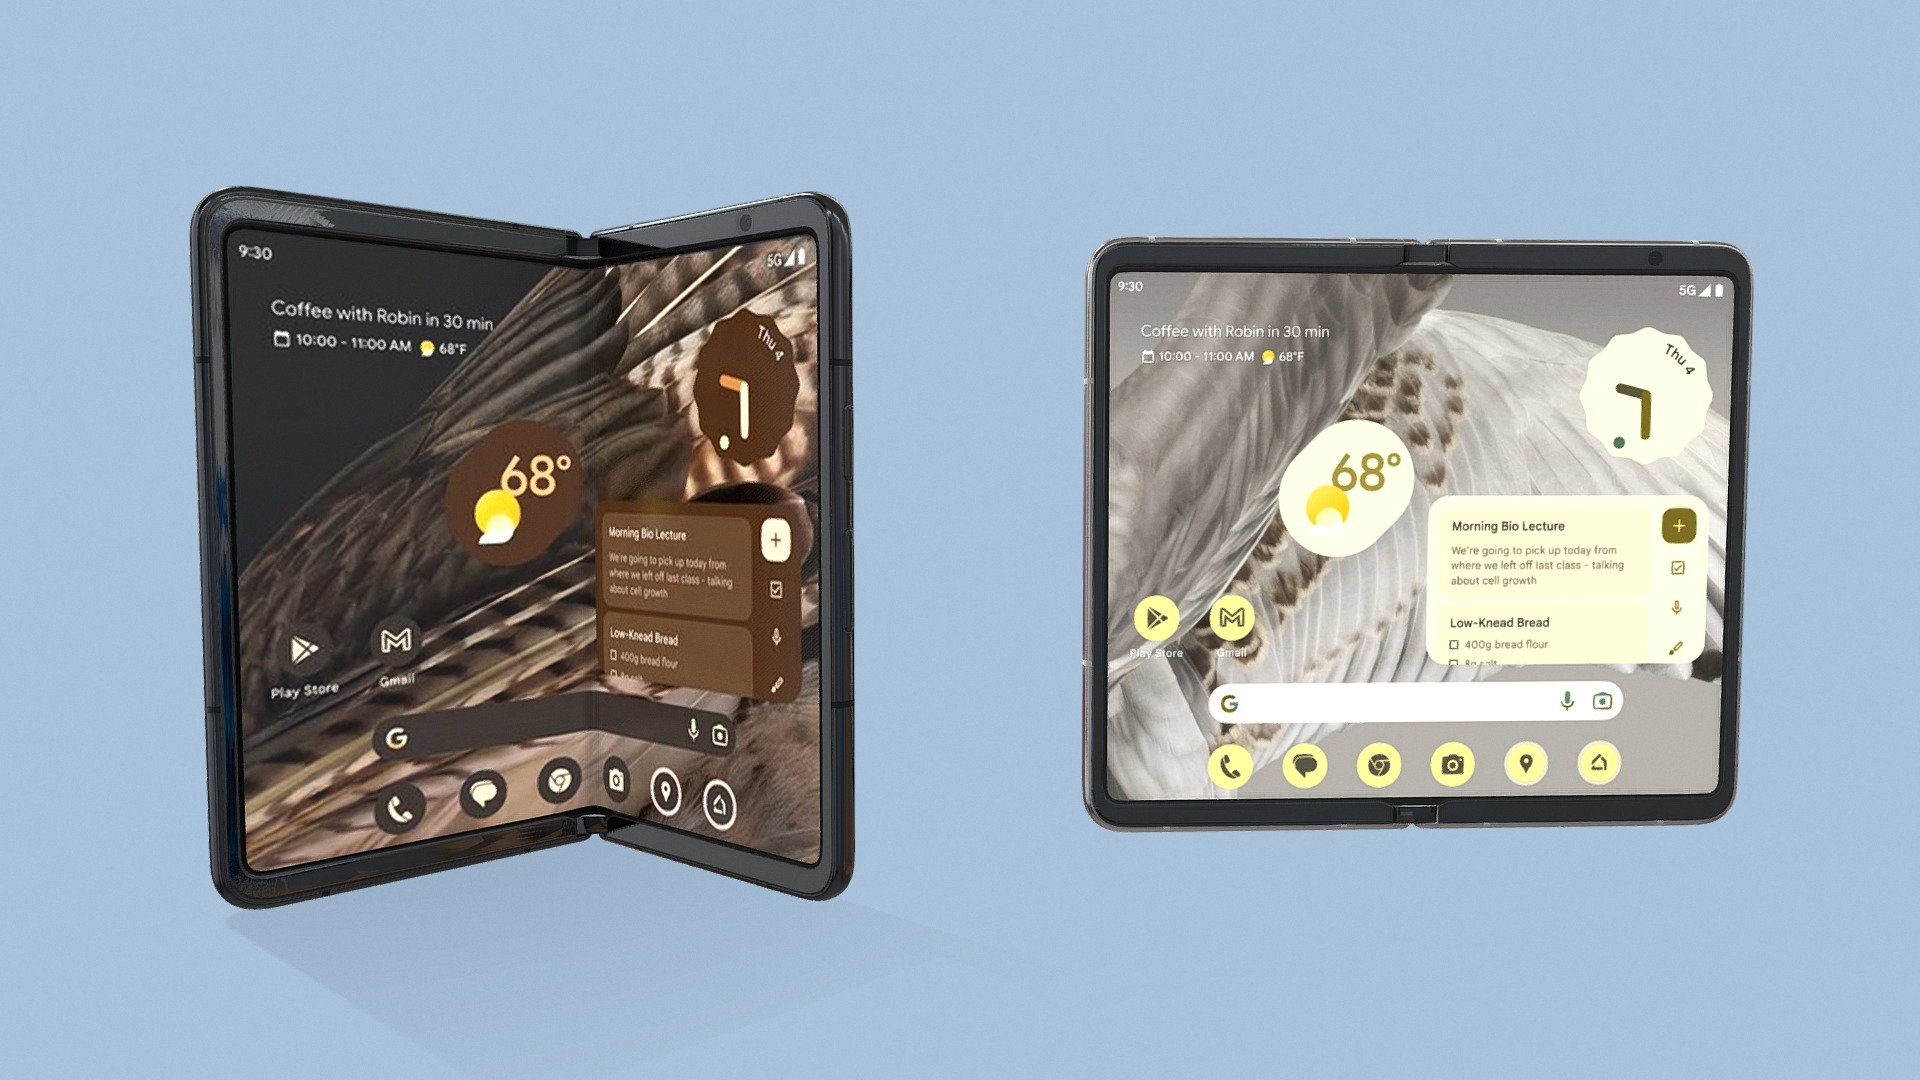 Realistic (copy) 3d model ofgoogle Pixel Fold 2023 all colors ( black and white ) , rigid with animation.

You can easily put custom screen.

The model optimized for game engines (Unreal, Unity…)

Download includes .obj ,.fbx ,.glb ,.blend file.

Textures: 4K PBR, bundled with additional textures







 - google Pixel Fold 2023 all colors rigid animated - Buy Royalty Free 3D model by dika3d (@ikad2023) 3d model